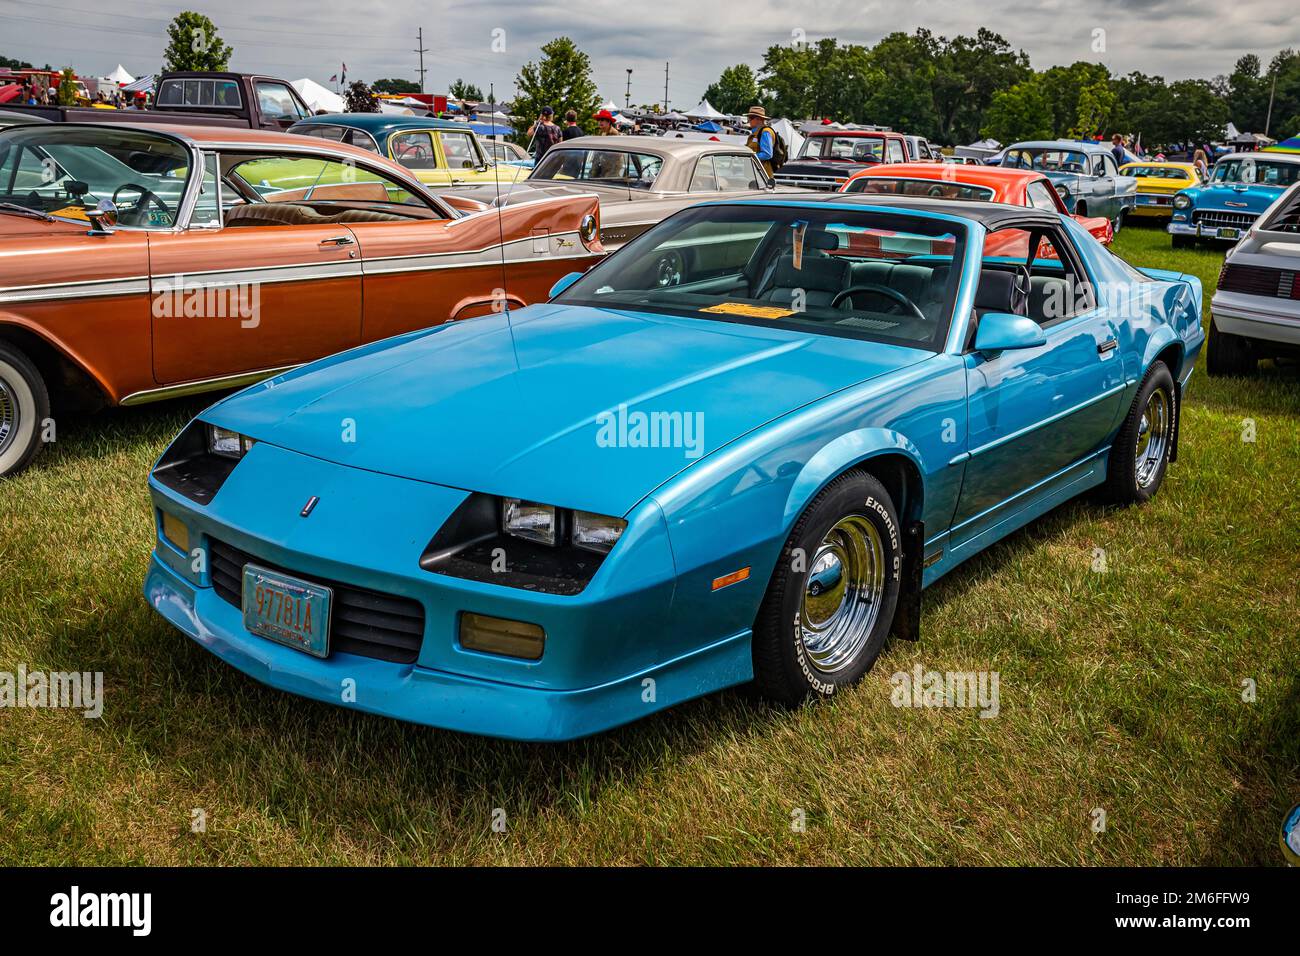 Iola, WI - July 07, 2022: High perspective front corner view of a 1990 Chevrolet Camaro RS Coupe at a local car show. Stock Photo